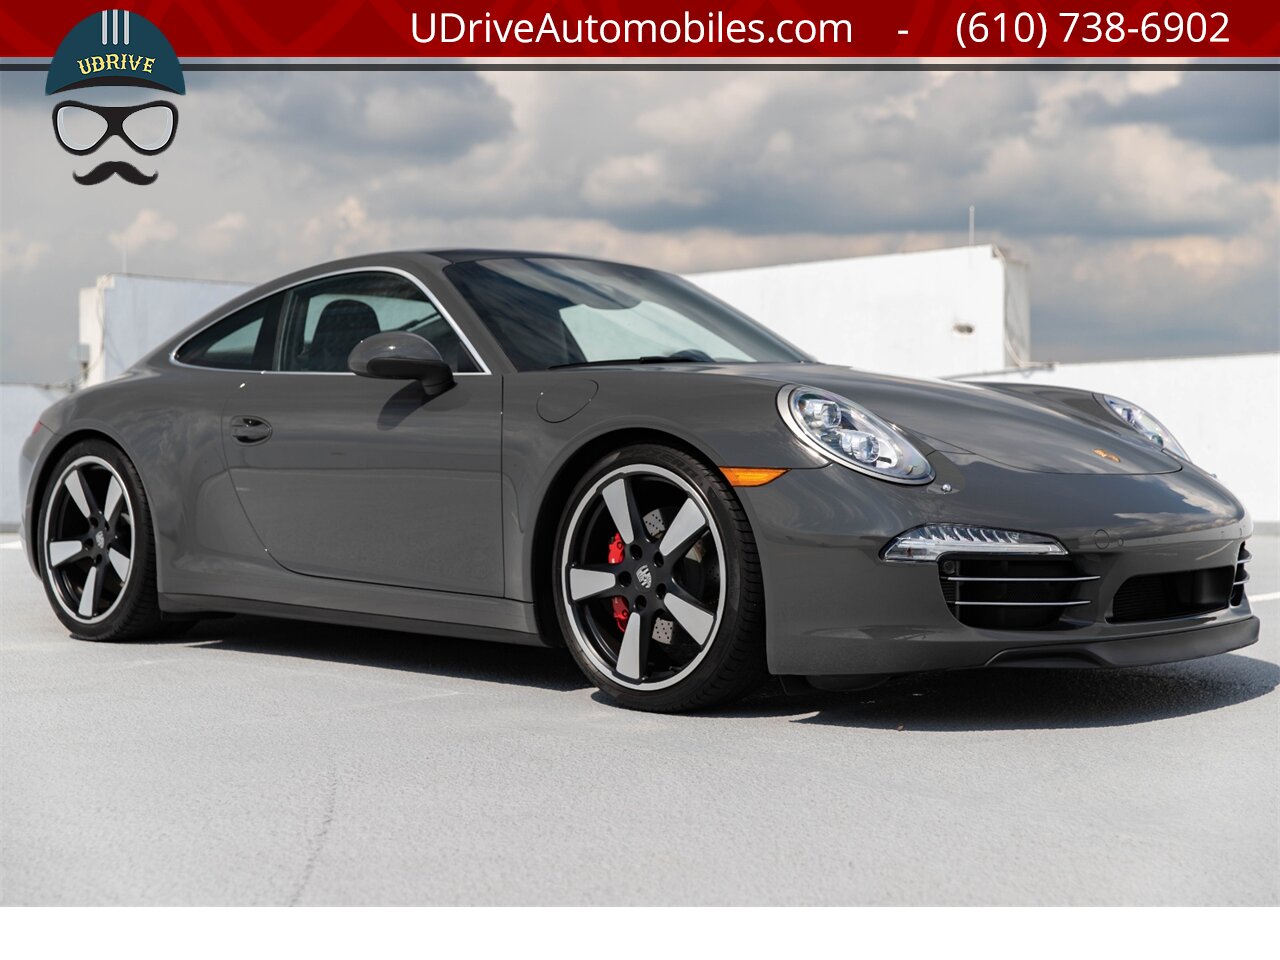 2014 Porsche 911 Carrera S 50th Anniversary Edition Certified  CPO Warranty thru 12/26/21 Full Front End Clear Film - Photo 13 - West Chester, PA 19382